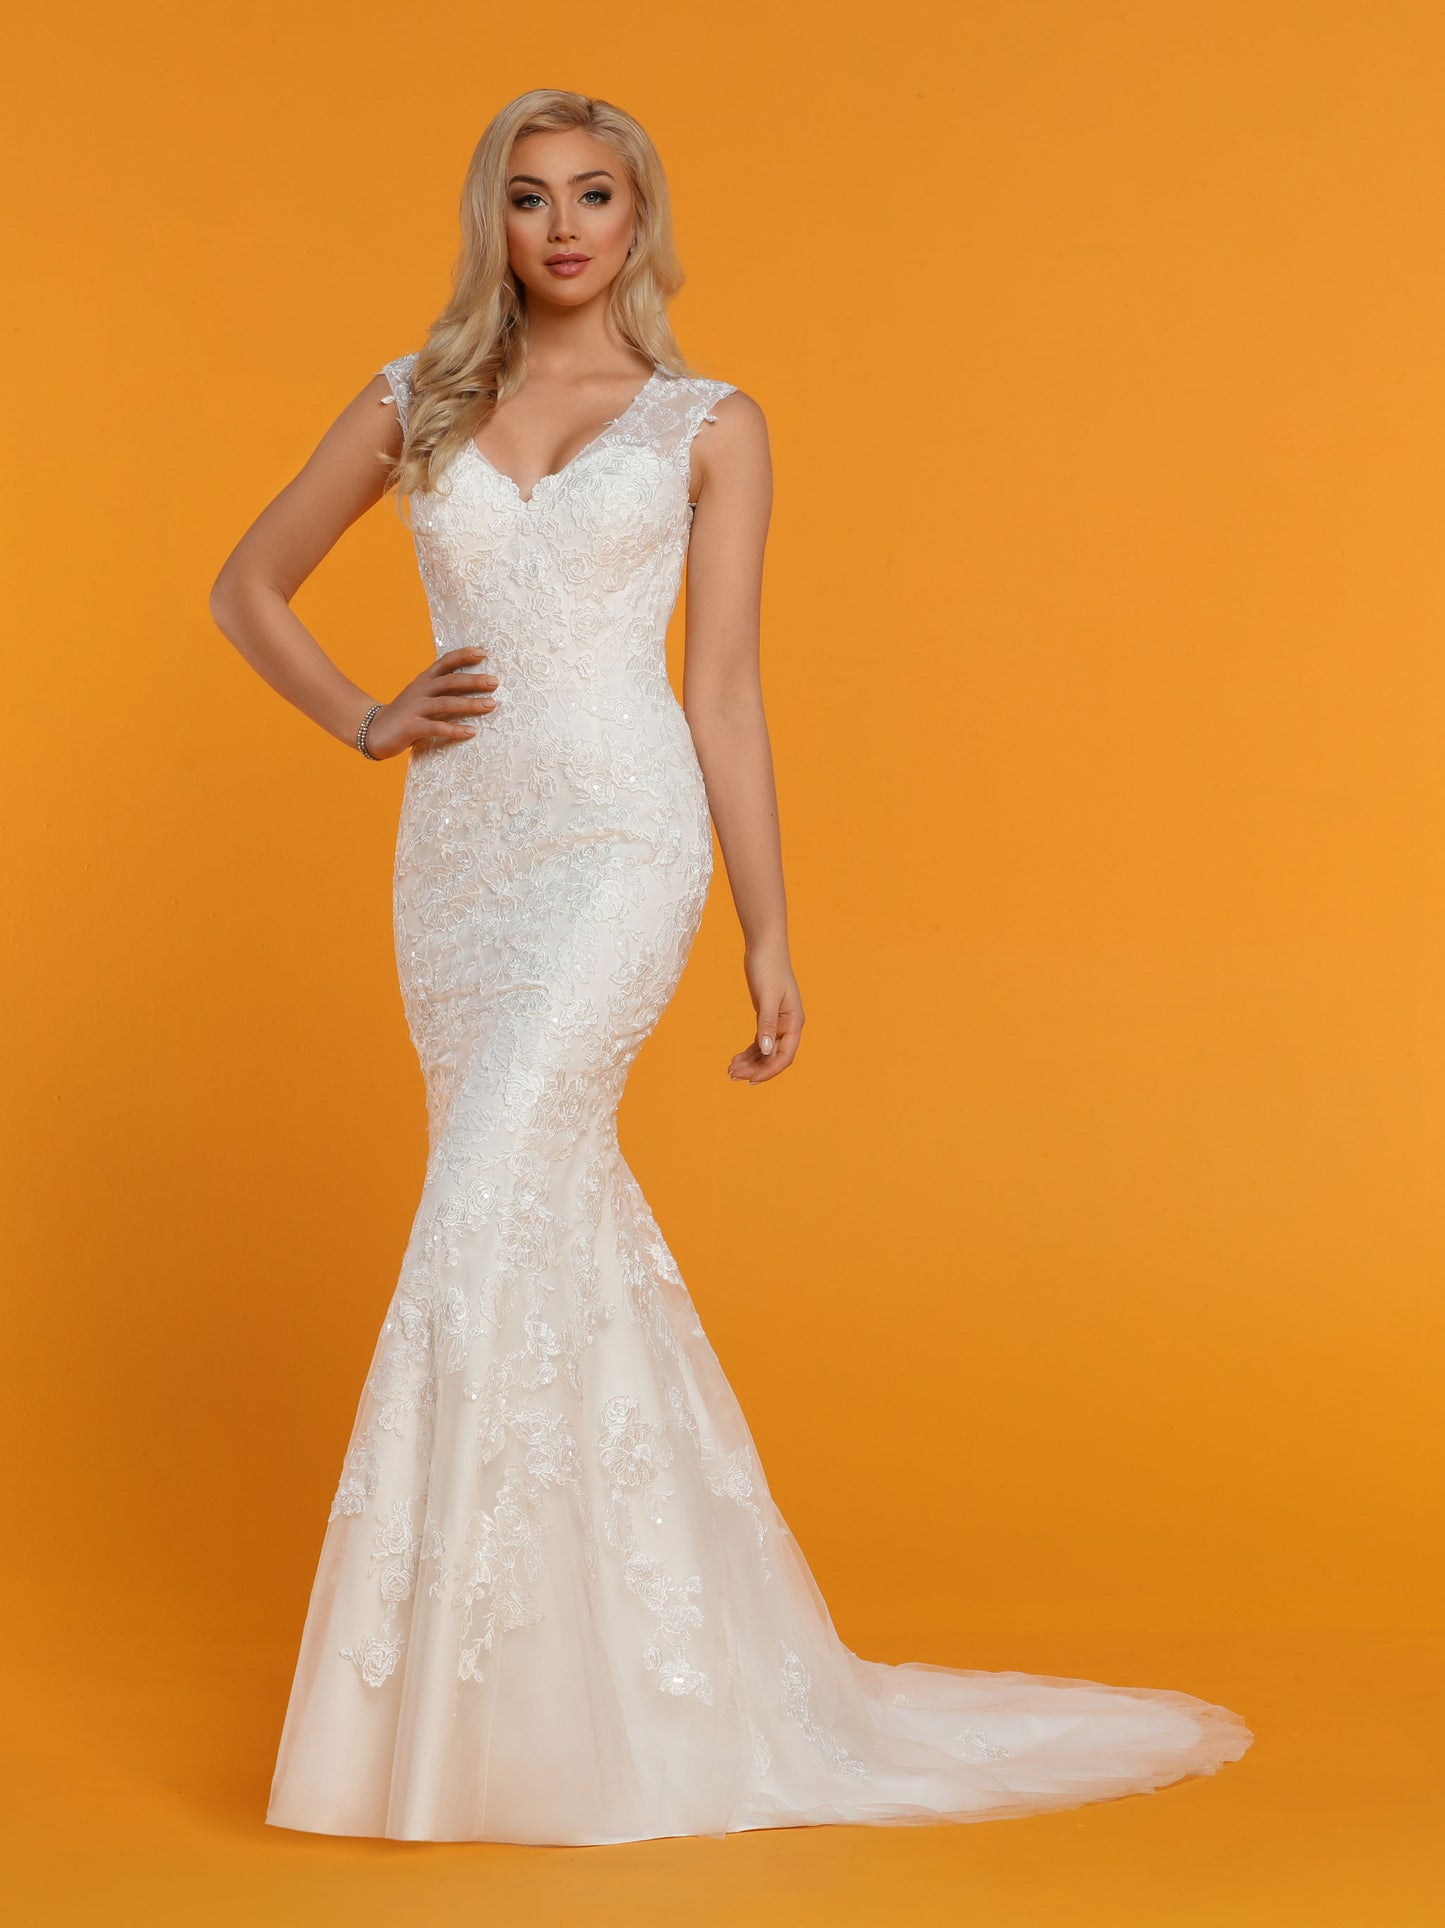 Davinci Bridal 50523 is a Long Fitted Fit & Flare Mermaid Embellished Wedding Dress. Featuring sheer lace embellished straps and back with button lined closure. Sequins scattered throughout the entire gown for a magical look.  Available for 1-2 Week Delivery!!!  Available Sizes: 2,4,6,8,10,12,14,16,18,20